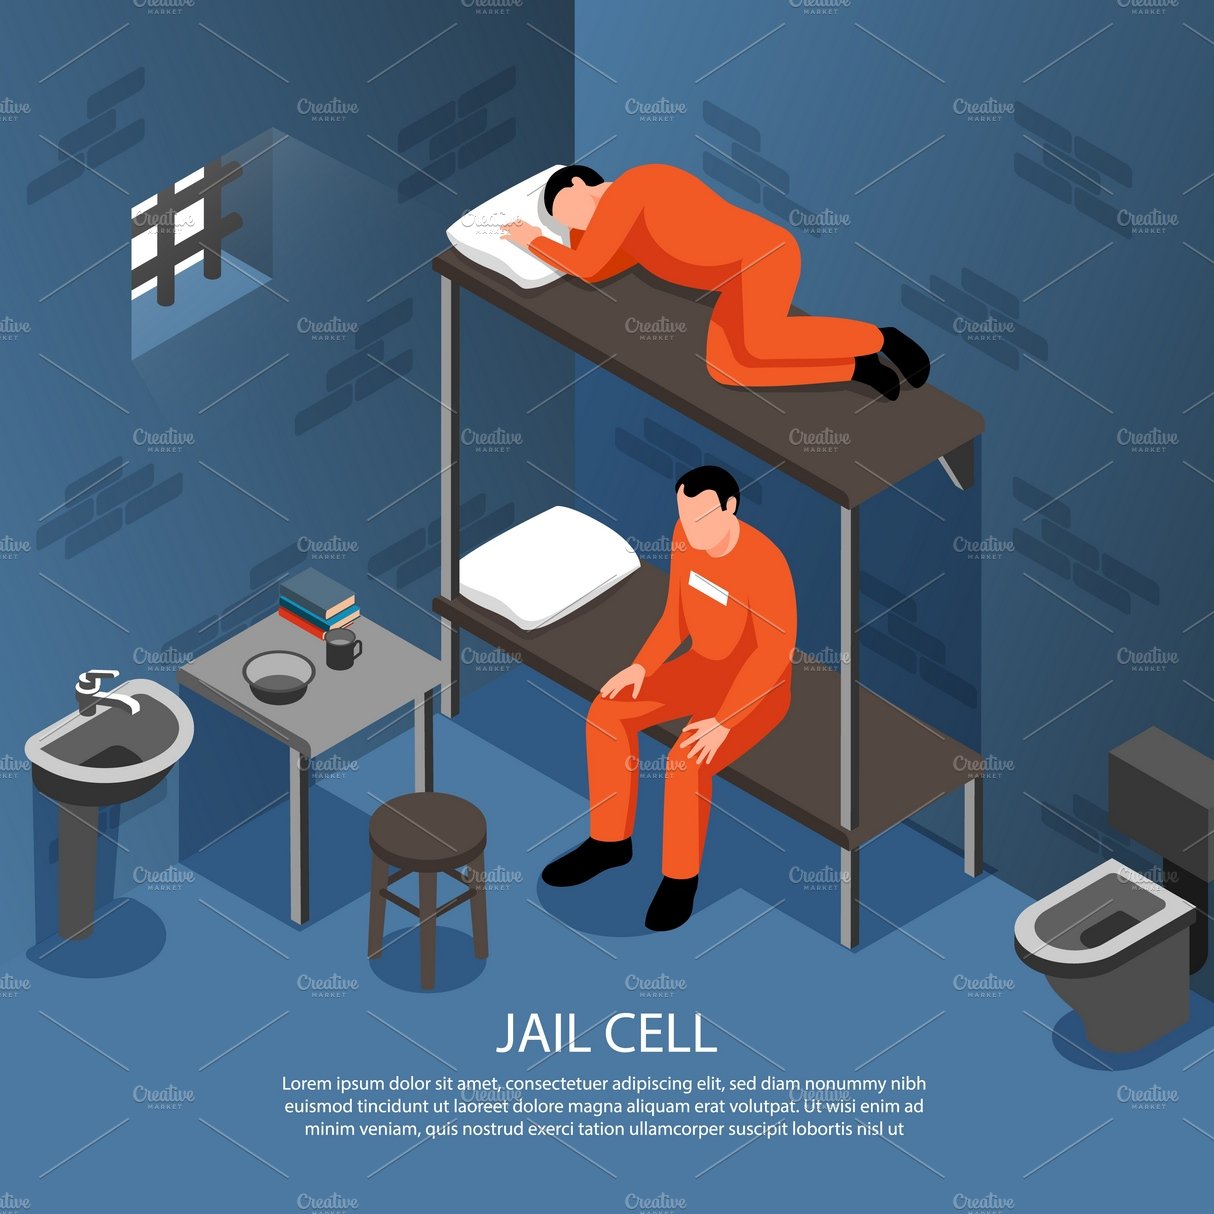 Jail cell isometric illustration cover image.